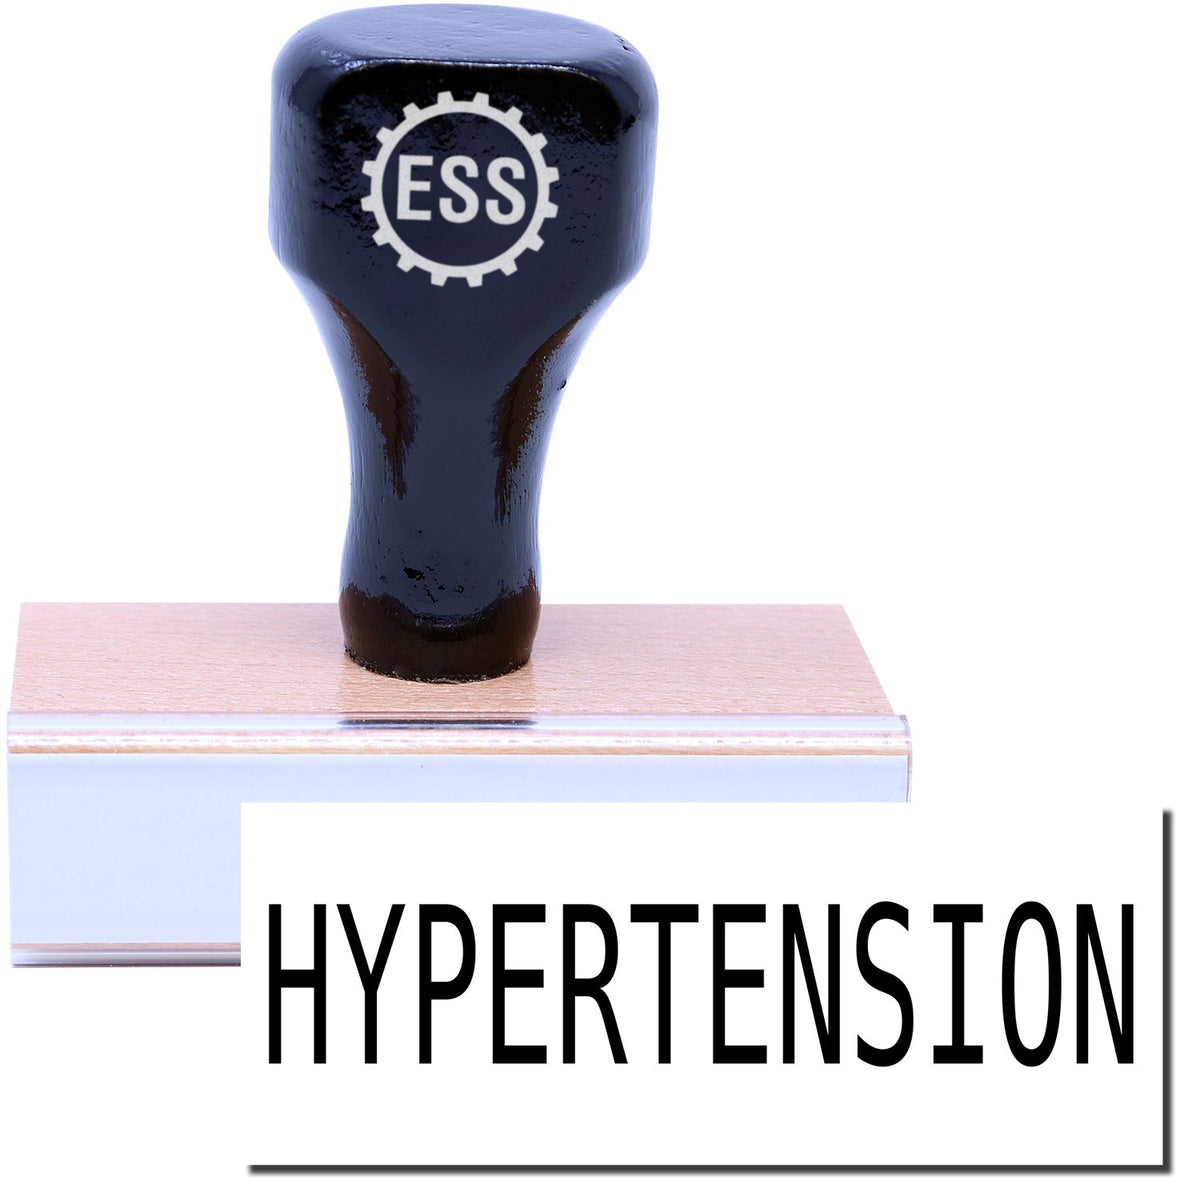 A stock office rubber stamp with a stamped image showing how the text &quot;HYPERTENSION&quot; in a large font is displayed after stamping.